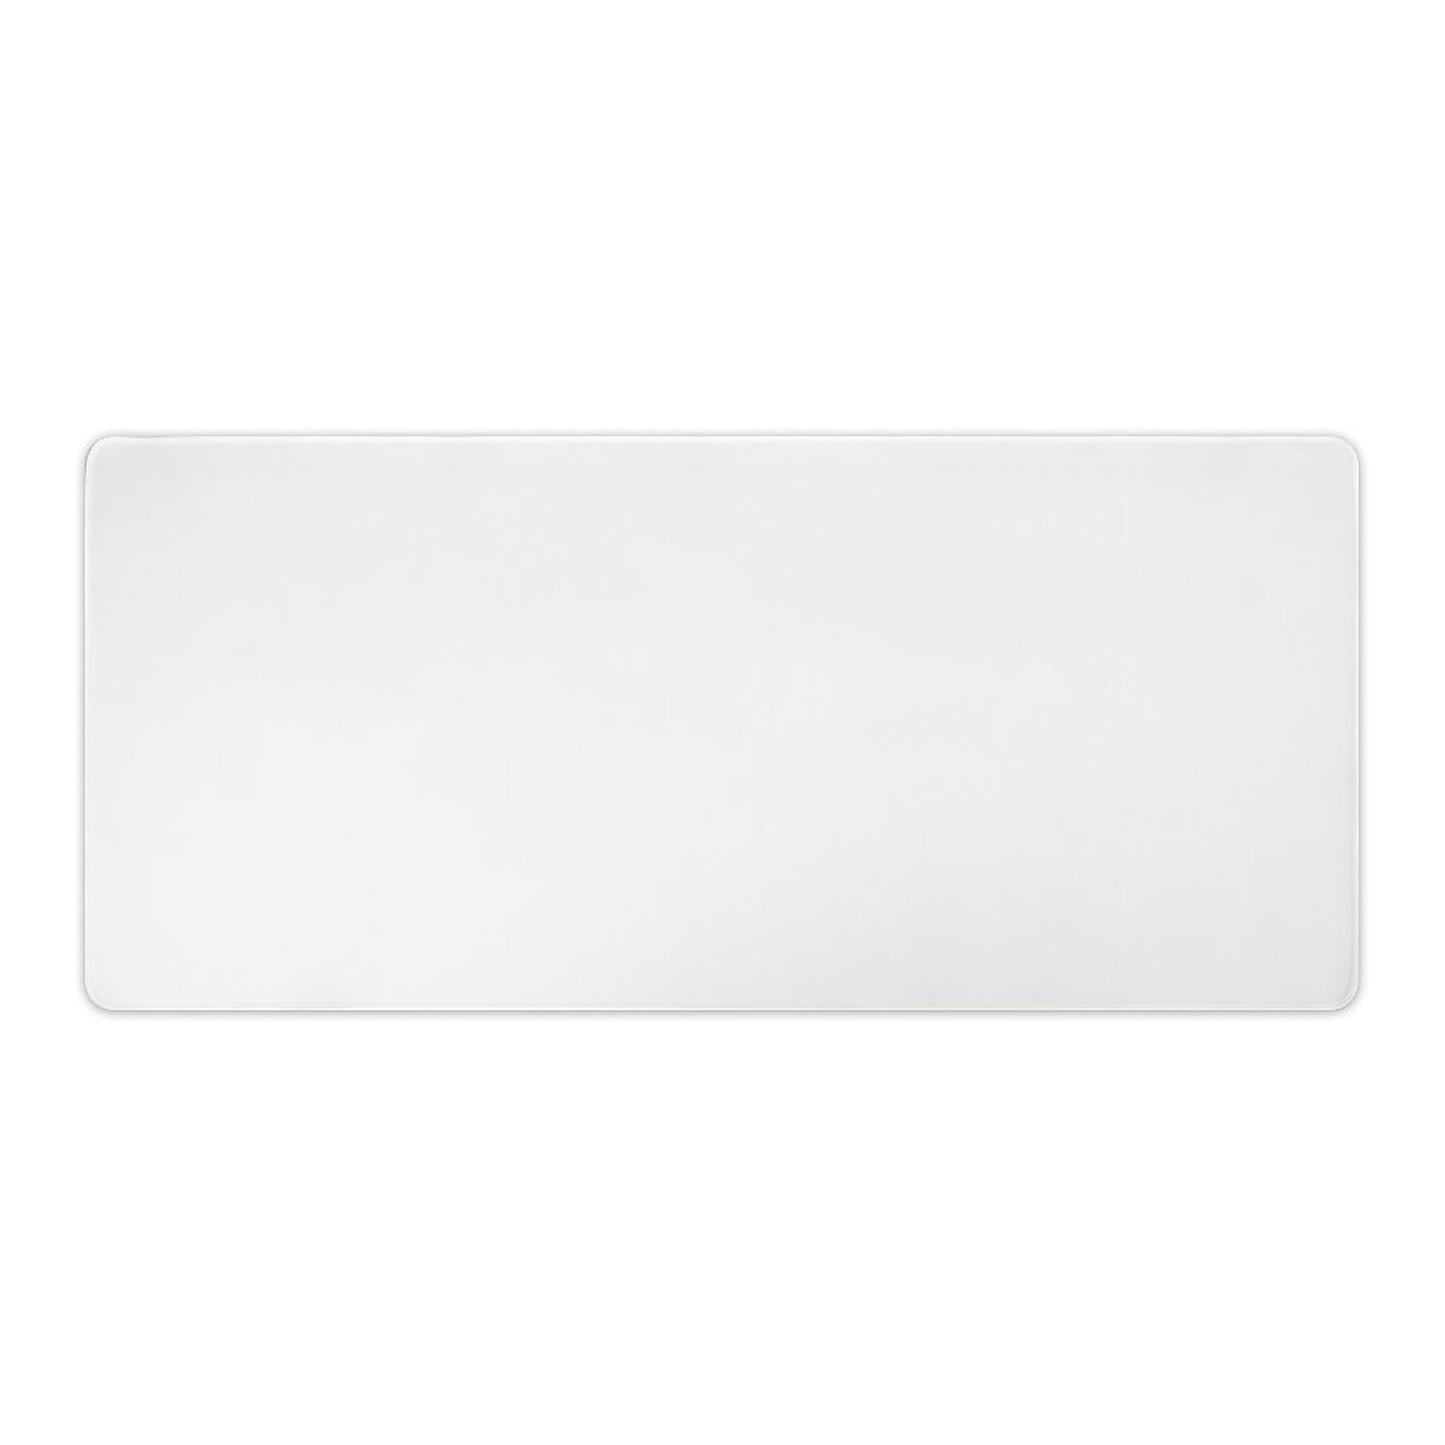 Personalize Your Own Desk Mat-16x36 in